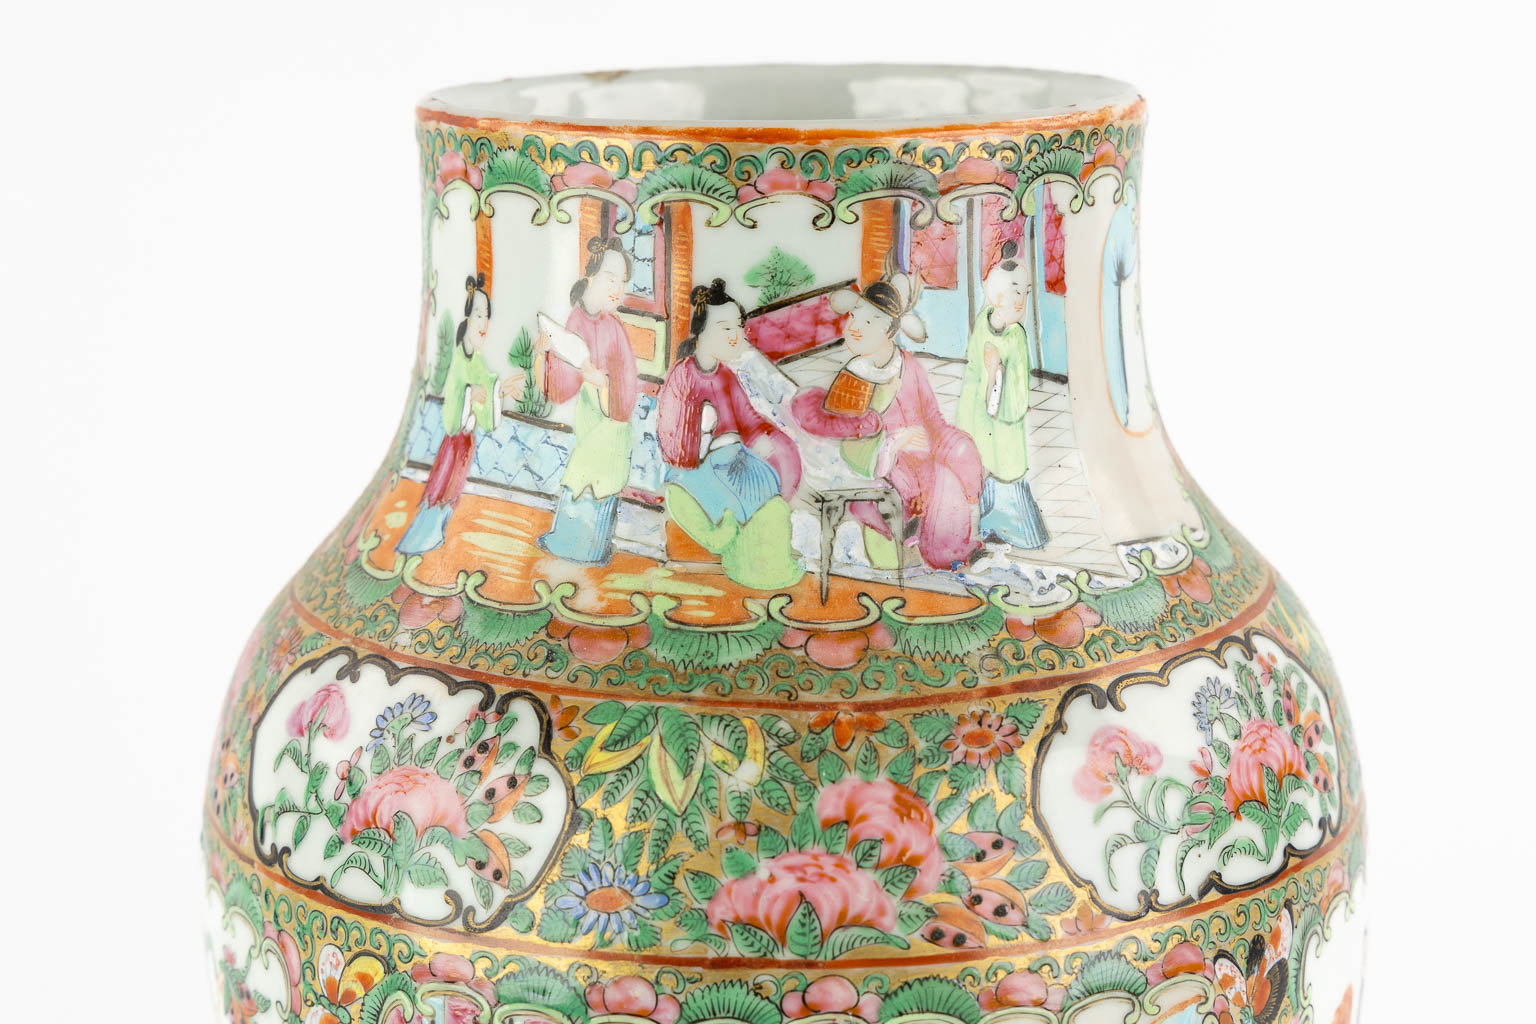 A Chinese Canton vase with a lid, interior scnes with figurines, fauna and flora. 19th/20th C. (H:4 - Image 15 of 19